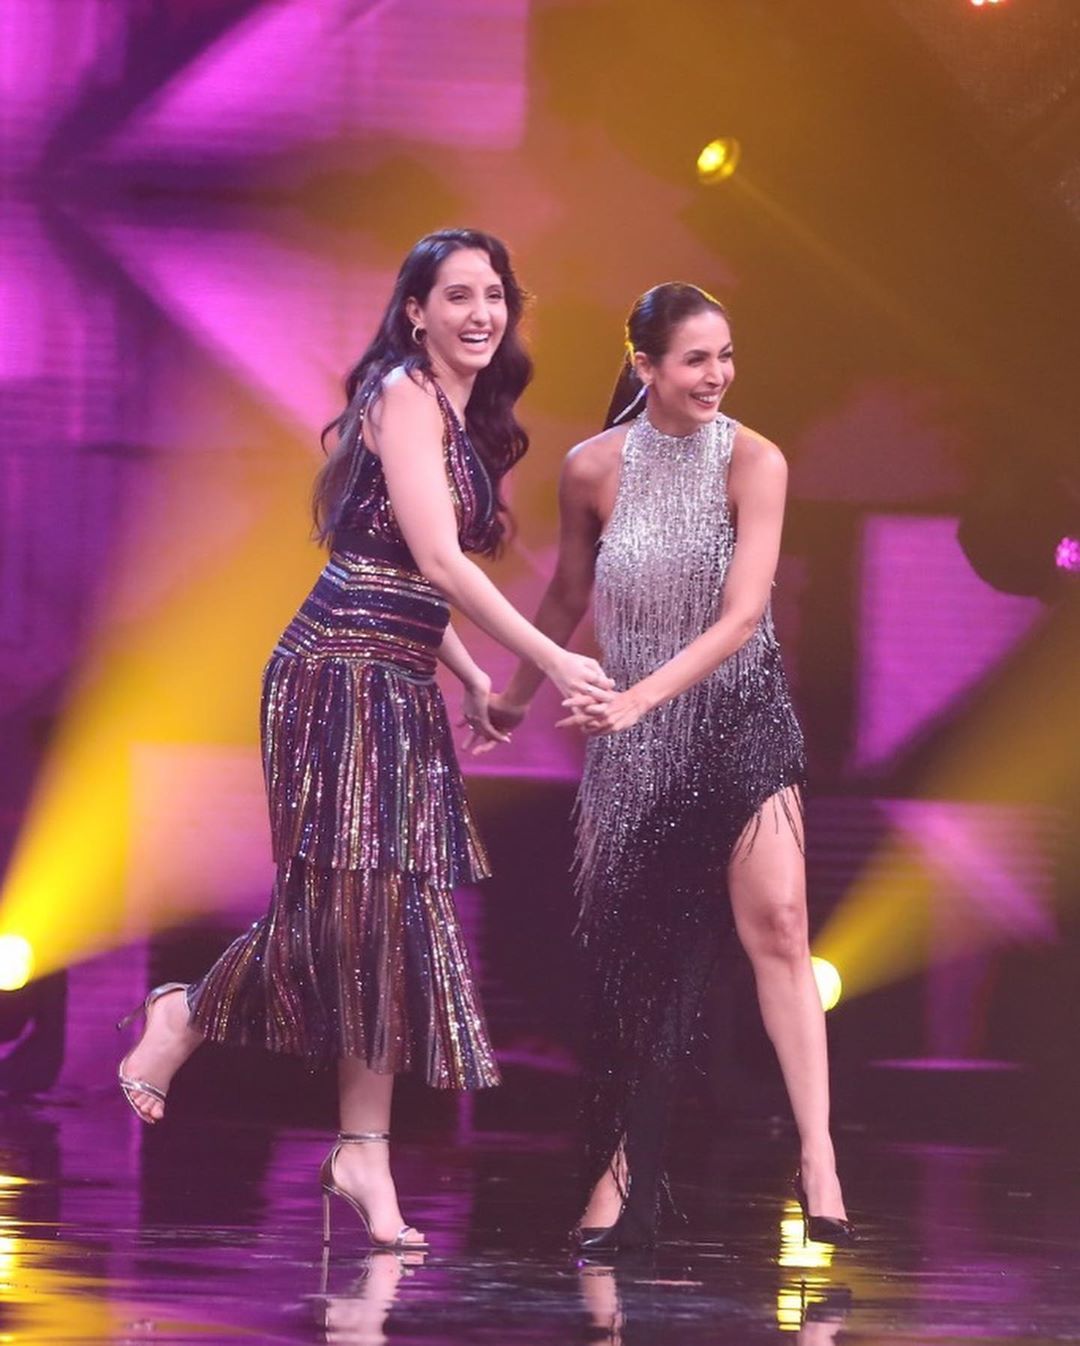 Nora Fatehi Gives A Shoutout To Malaika Arora As She Returns To India's Best Dancer Says, 'No One Can Take Your Place Queen'